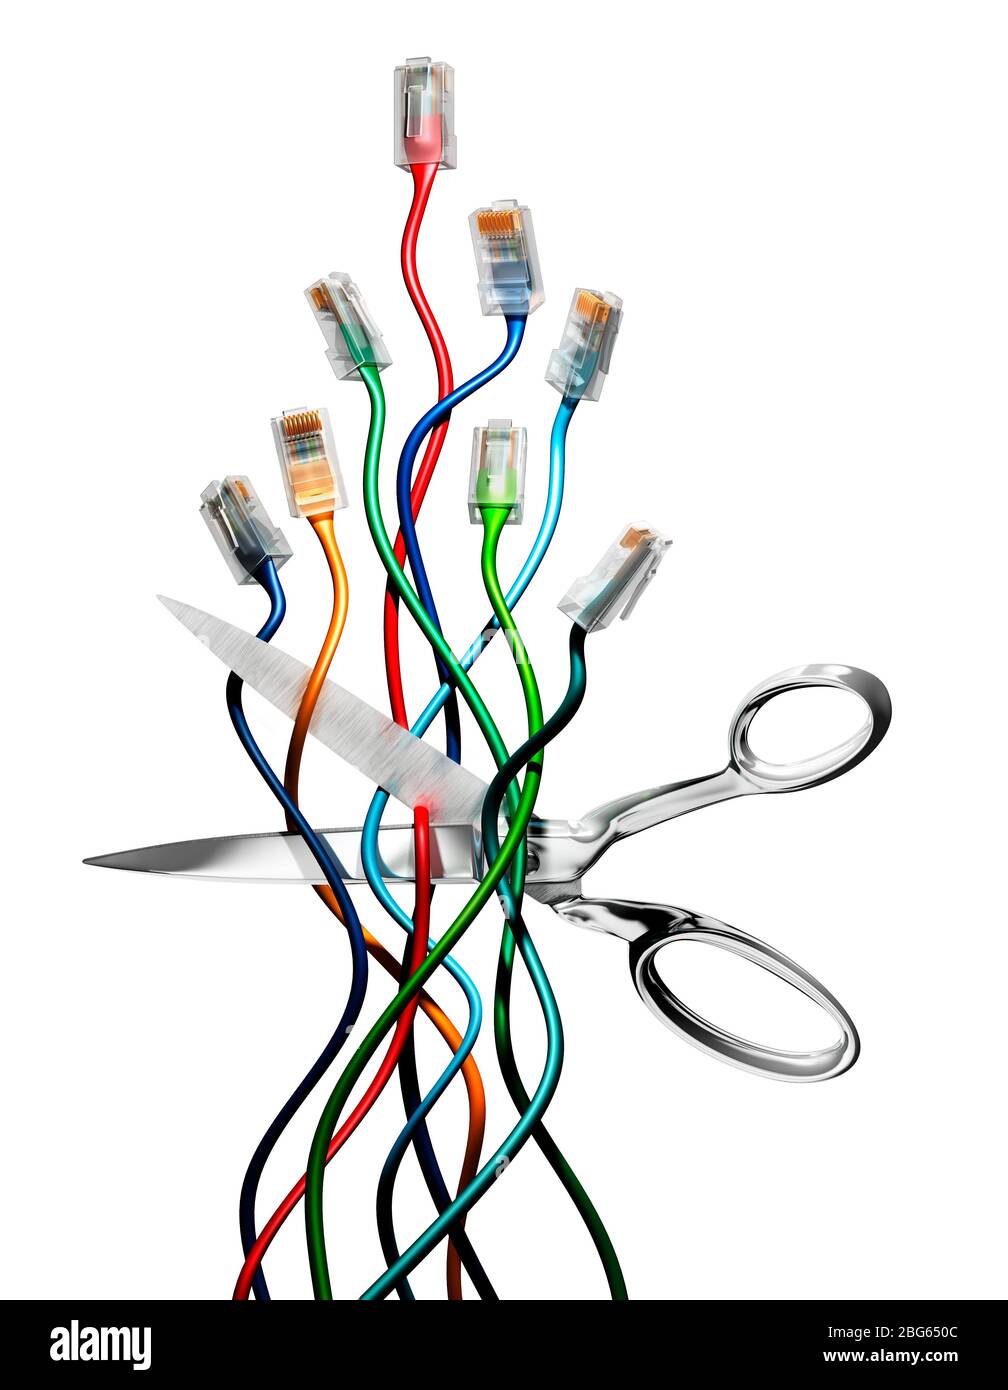 Wireless. Wi-Fi, wifi. Scissors cutting wires. ethernet cables. White background. Stock Photo